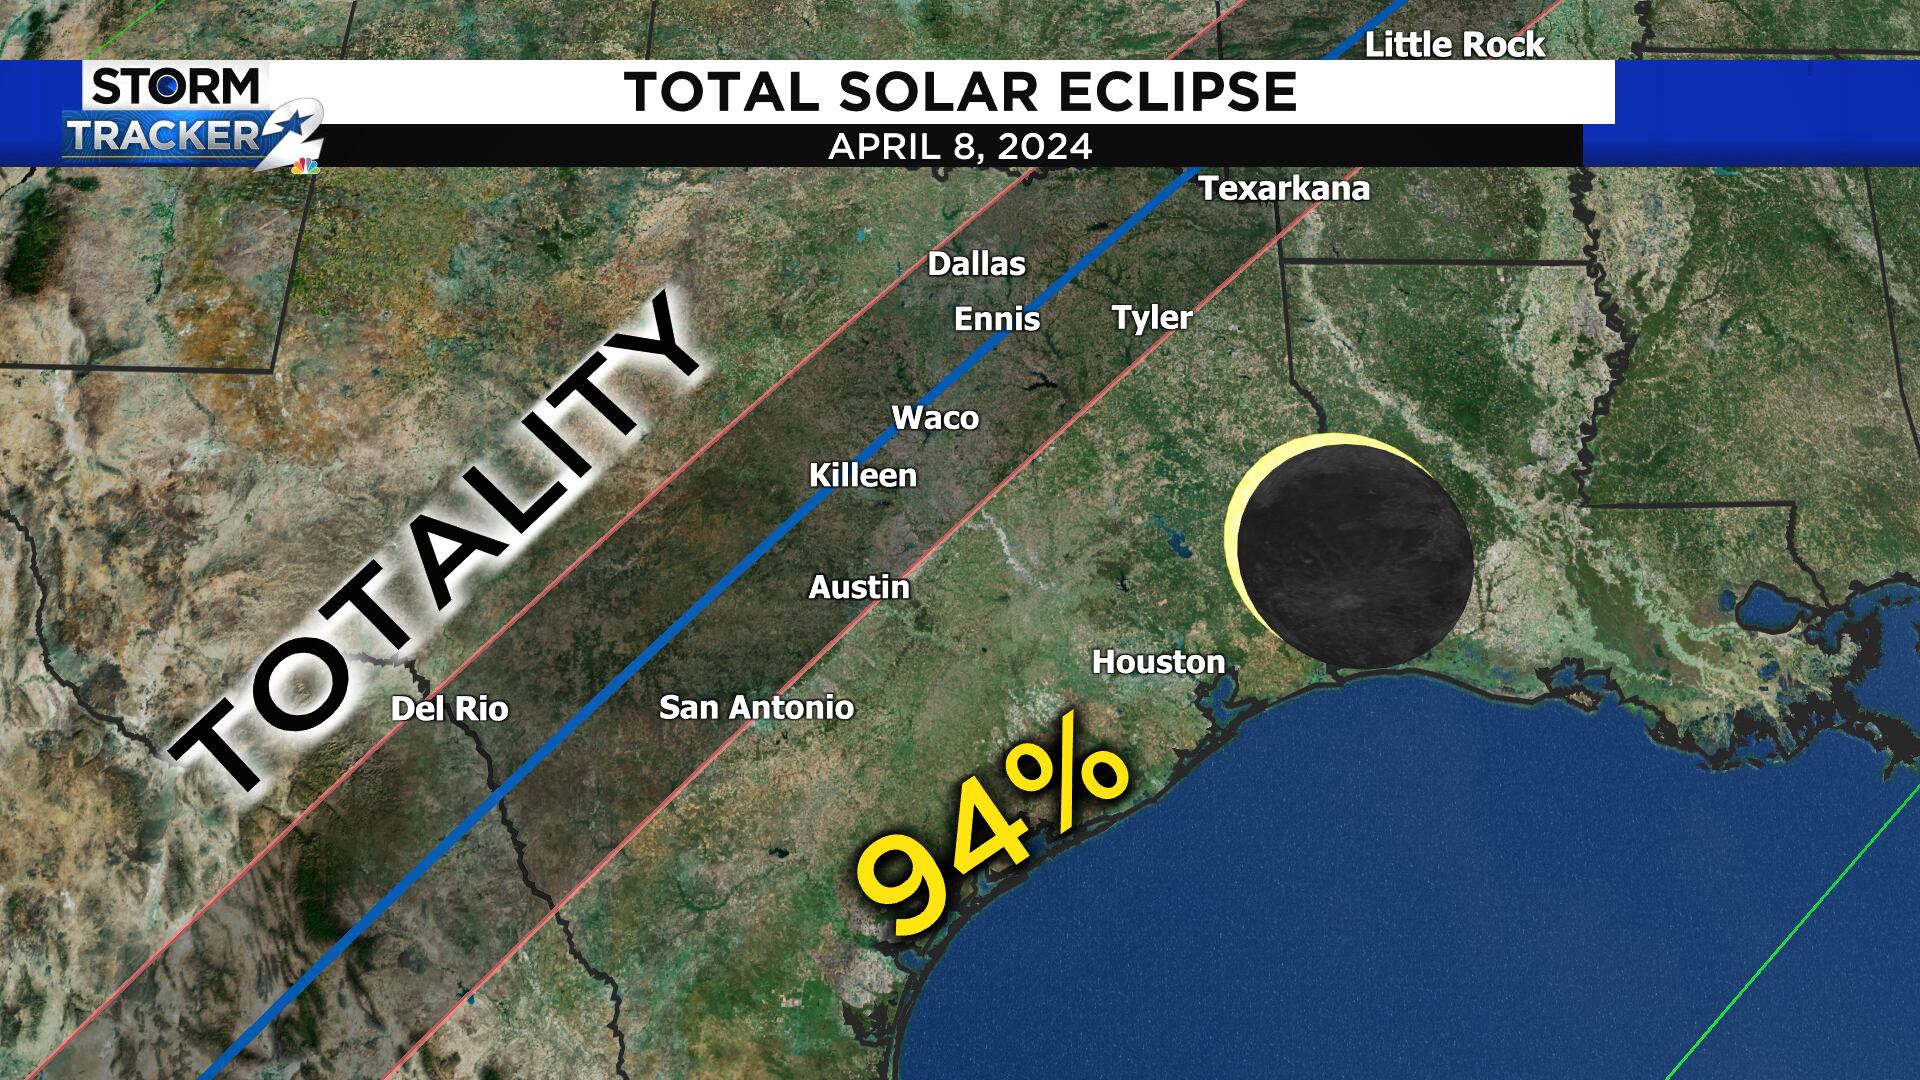 You have to be between the lines to see totality. Houston gets 94% of the sun covered.